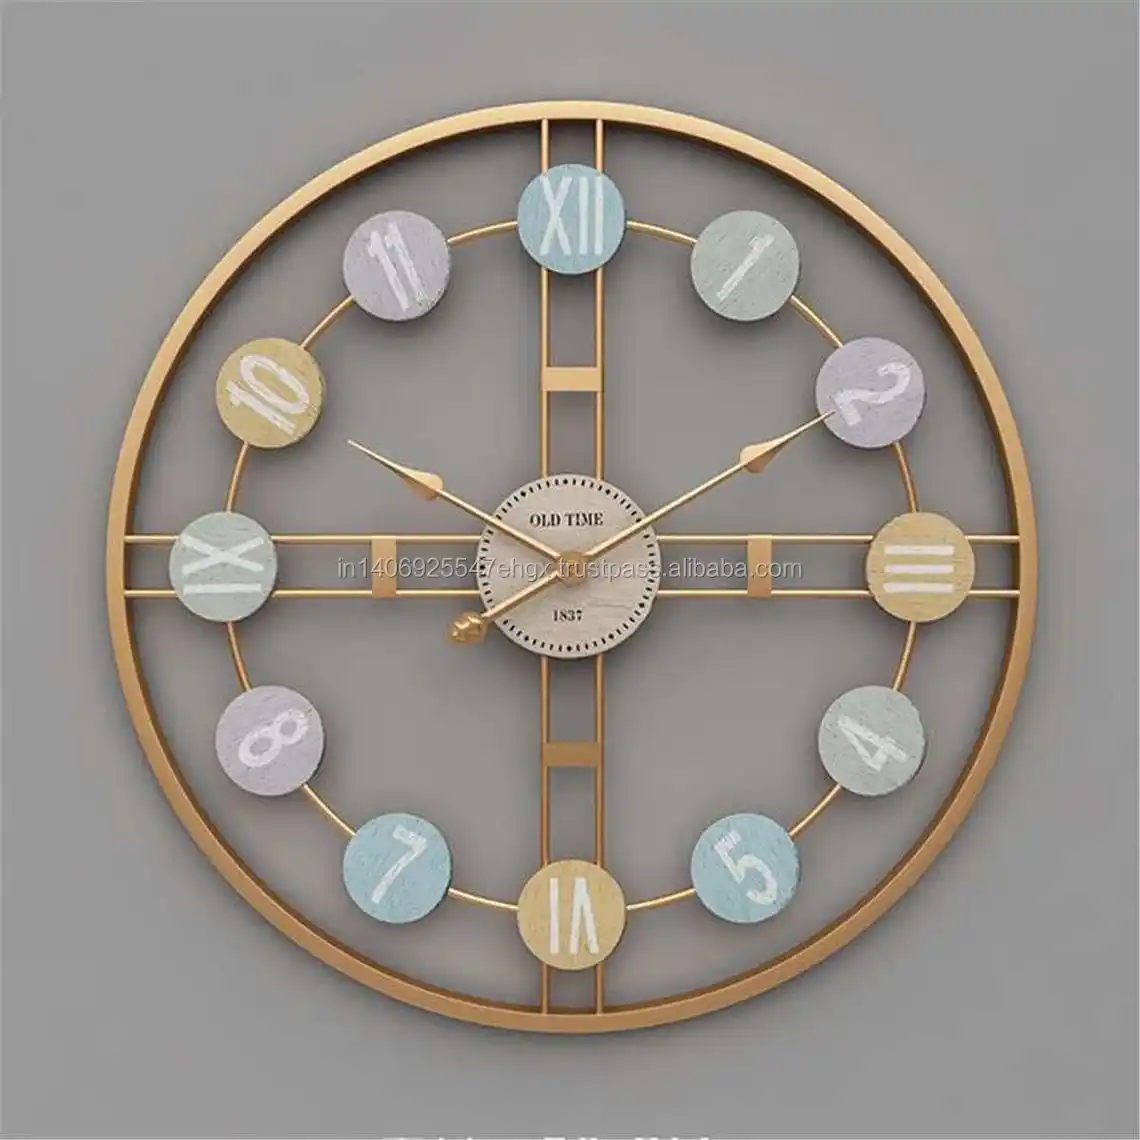 Outdoor Roman Number Metal Garden large wall clock wall decor for 2021